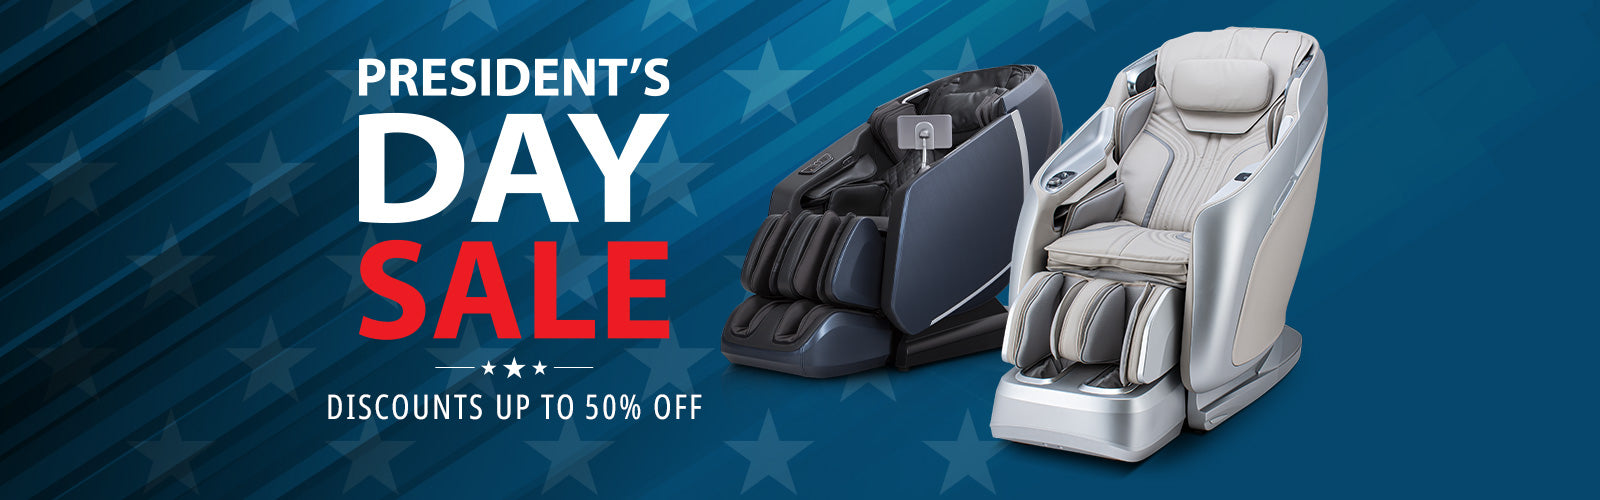 MassageChairPlanet Presidents' Day Sales Event Save up to 50% on select models